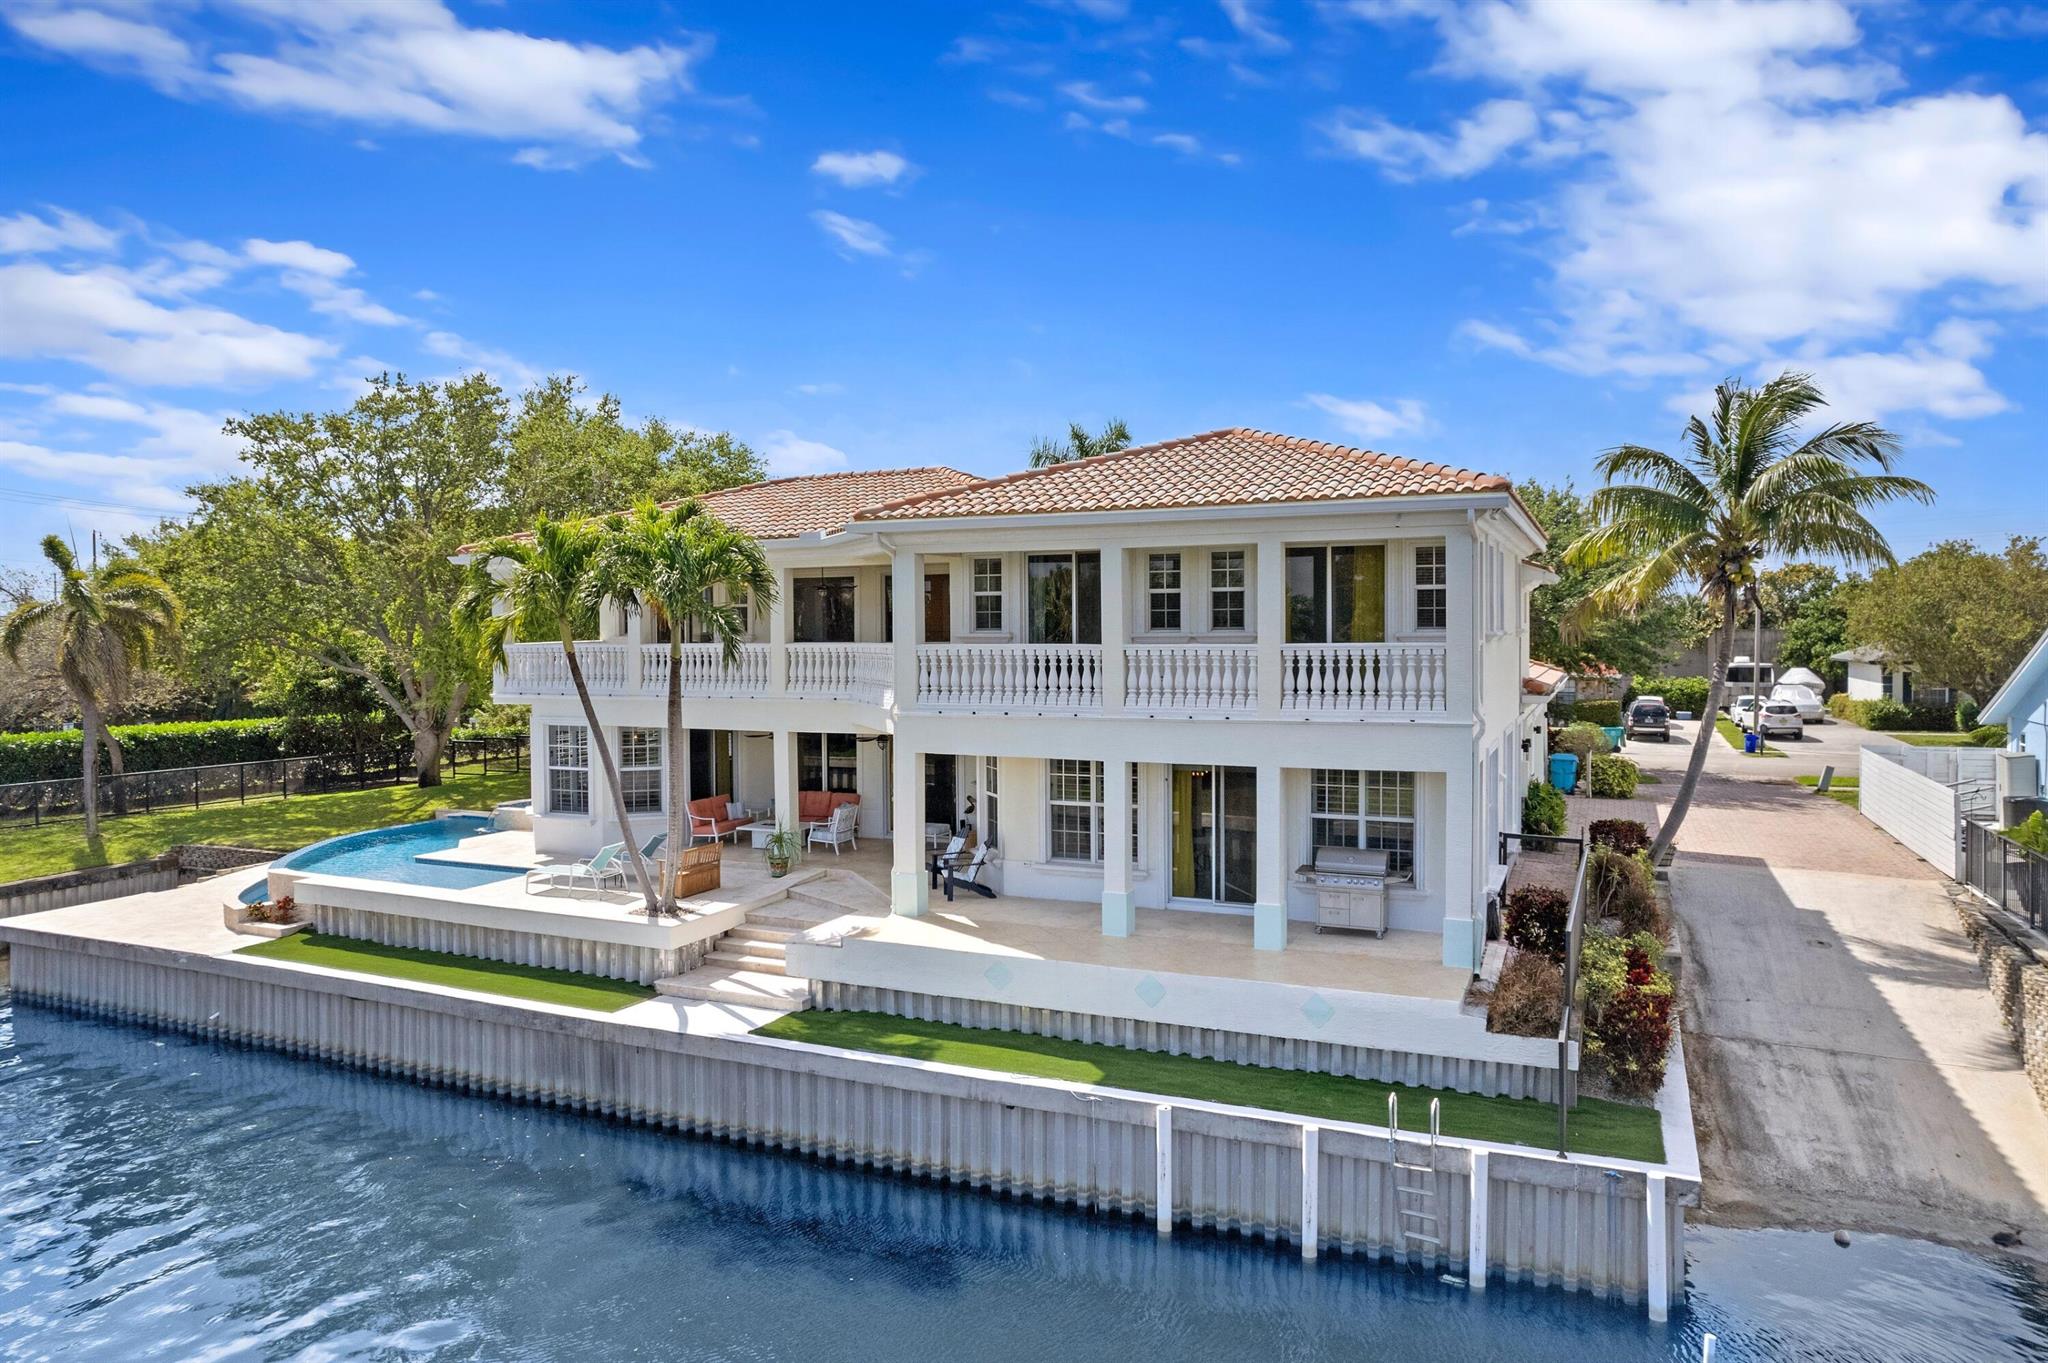 GORGEOUS & PRISTINE CUSTOM BUILT WATERFRONT ESTATE! SPECTACULAR LAKE IDA+LAKE EDEN+ WIDE CANAL WATERVIEWS | PRIVATE DOCK & BOAT RAMP | 120' WATERFRONT | 1/2 ACRE CORNER LOT | 3 Miles to Beach + Downtown Delray Atlantic Ave |  HIGH-END MATERIALS & SUPERIOR CRAFTSMENSHIP | 5 Bed Ensuite | 4.1Bath | Spectacular 1st Floor Master Ensuite with All Water Views | Huge Ceiling Heights | Bright Open Floorplan | Gourmet Chefs Kitchen, High-End S/S Appl, Gas Stove, Quartz Counters, Center Islands/Bar | Natural Wood/Porcelain Tile | Floor to Ceiling Windows/Doors | All Hurricane Impact Complete | Plantation Shutters | New 2022 Infinity Salt Water Pool & Jacuzzi, Waterfall | Travertine Wrap-Around Waterview Patio & Balcony | 2+Car GA | RV/Boat Parking | Huge Game Room | So Much More!